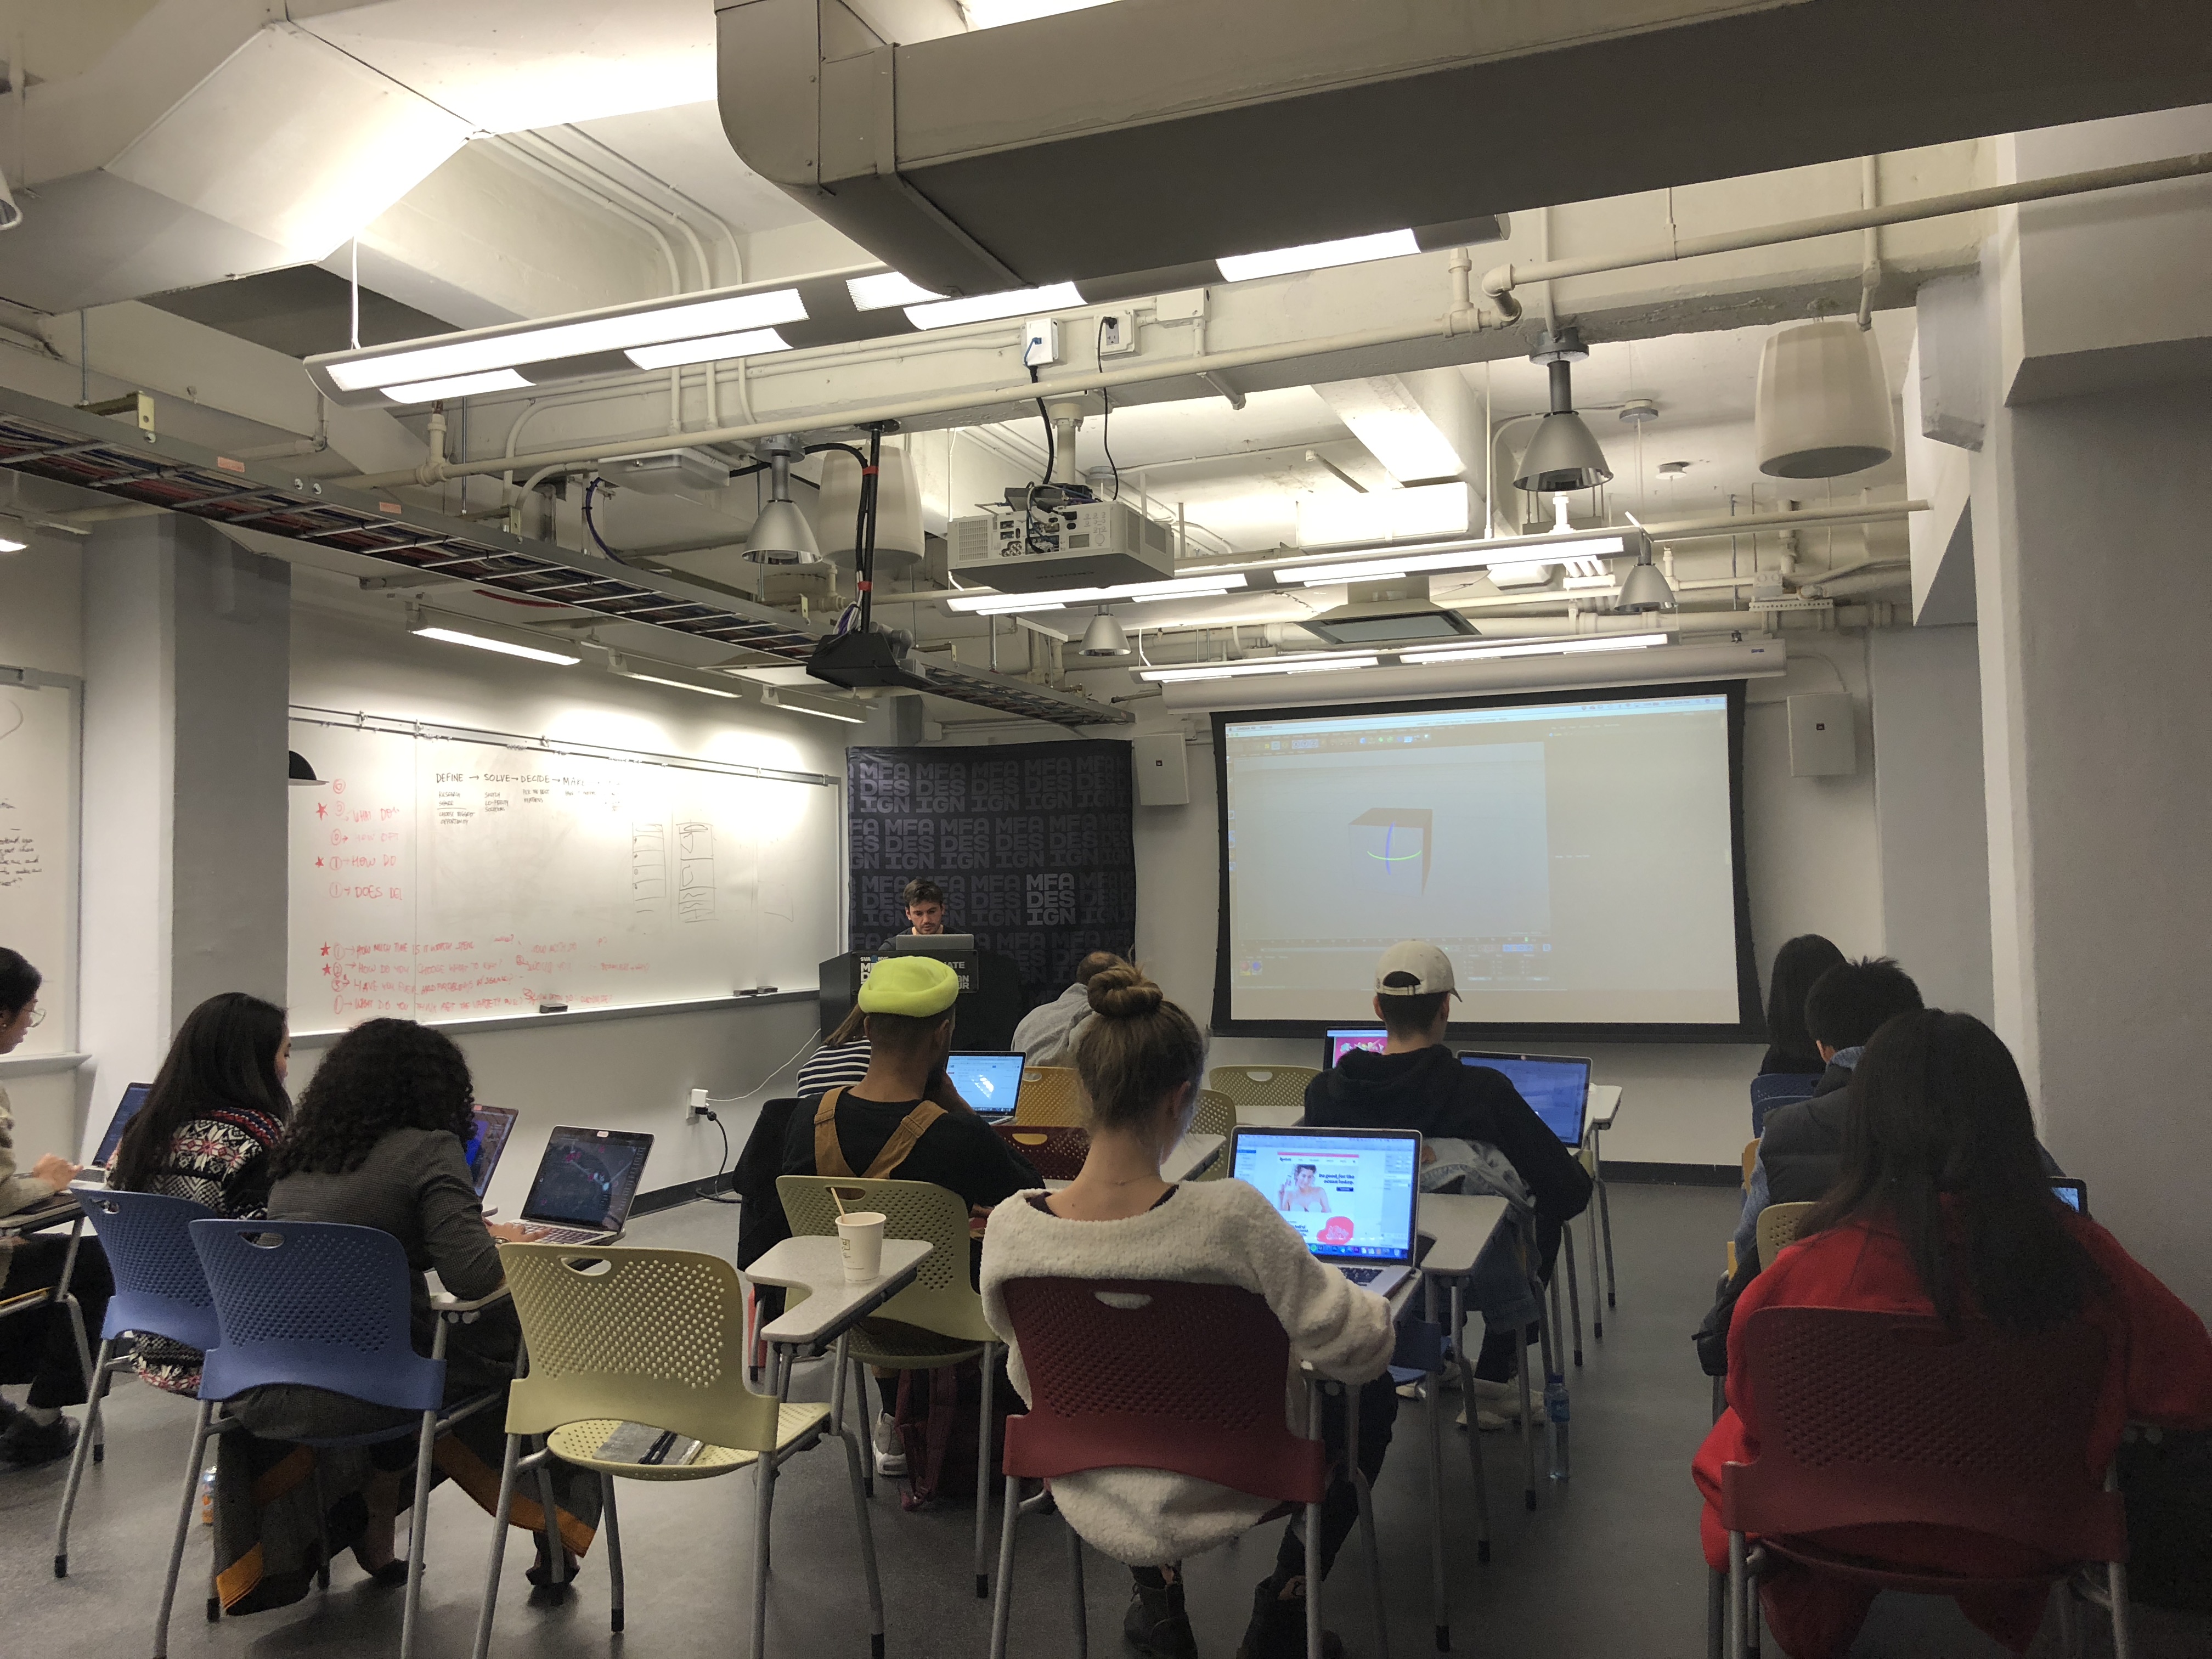 A photo from a classroom showing students sitting at their desks and following a lecture on a screen projector.